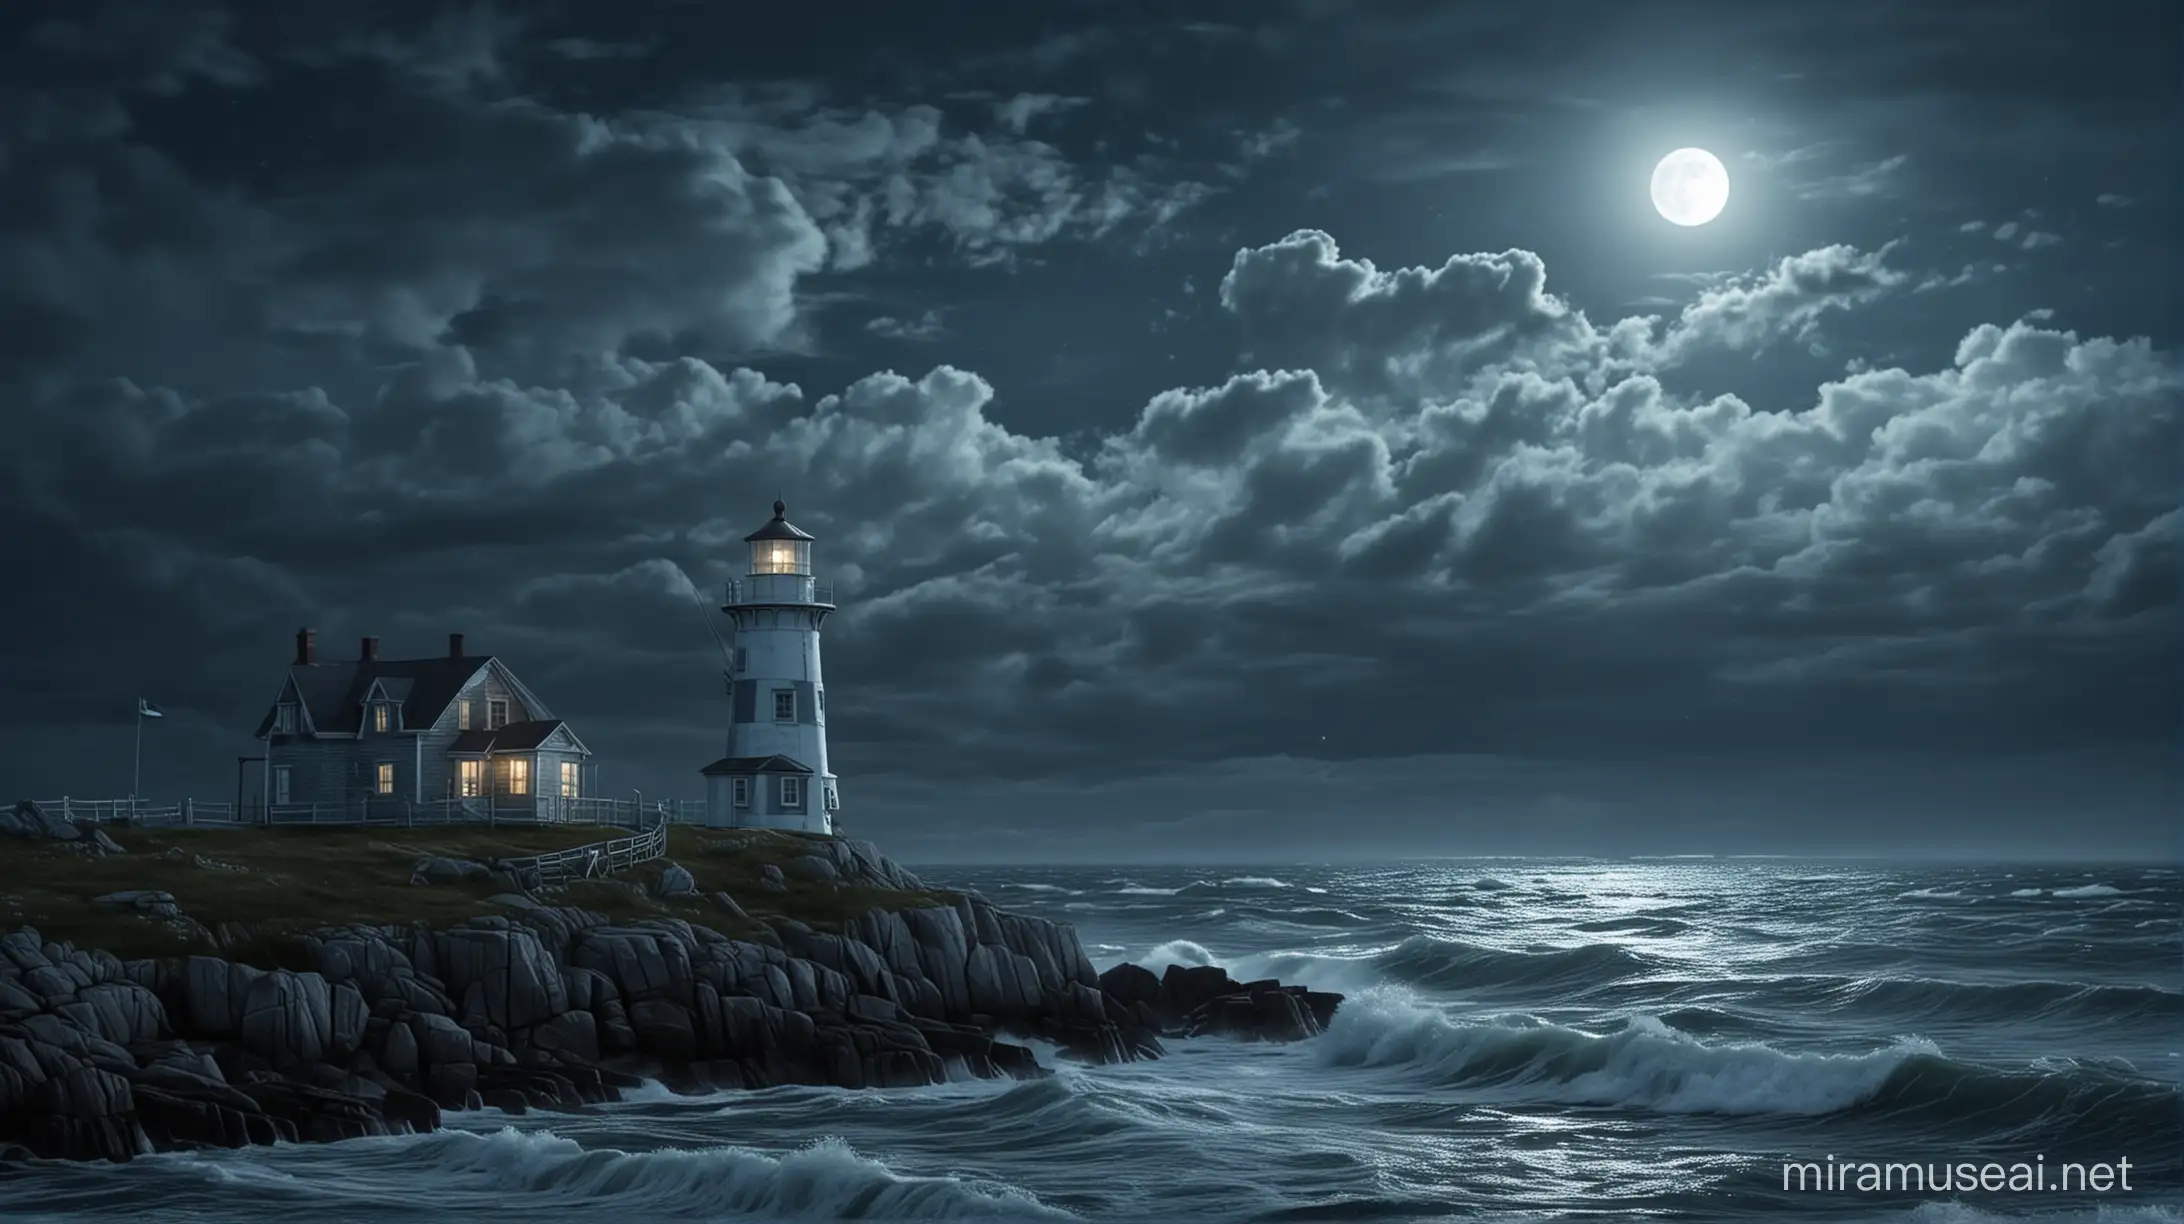 nova scotia shabby lighthouse at night with moon and storm clouds, cinamatic, realistic, blue shade
